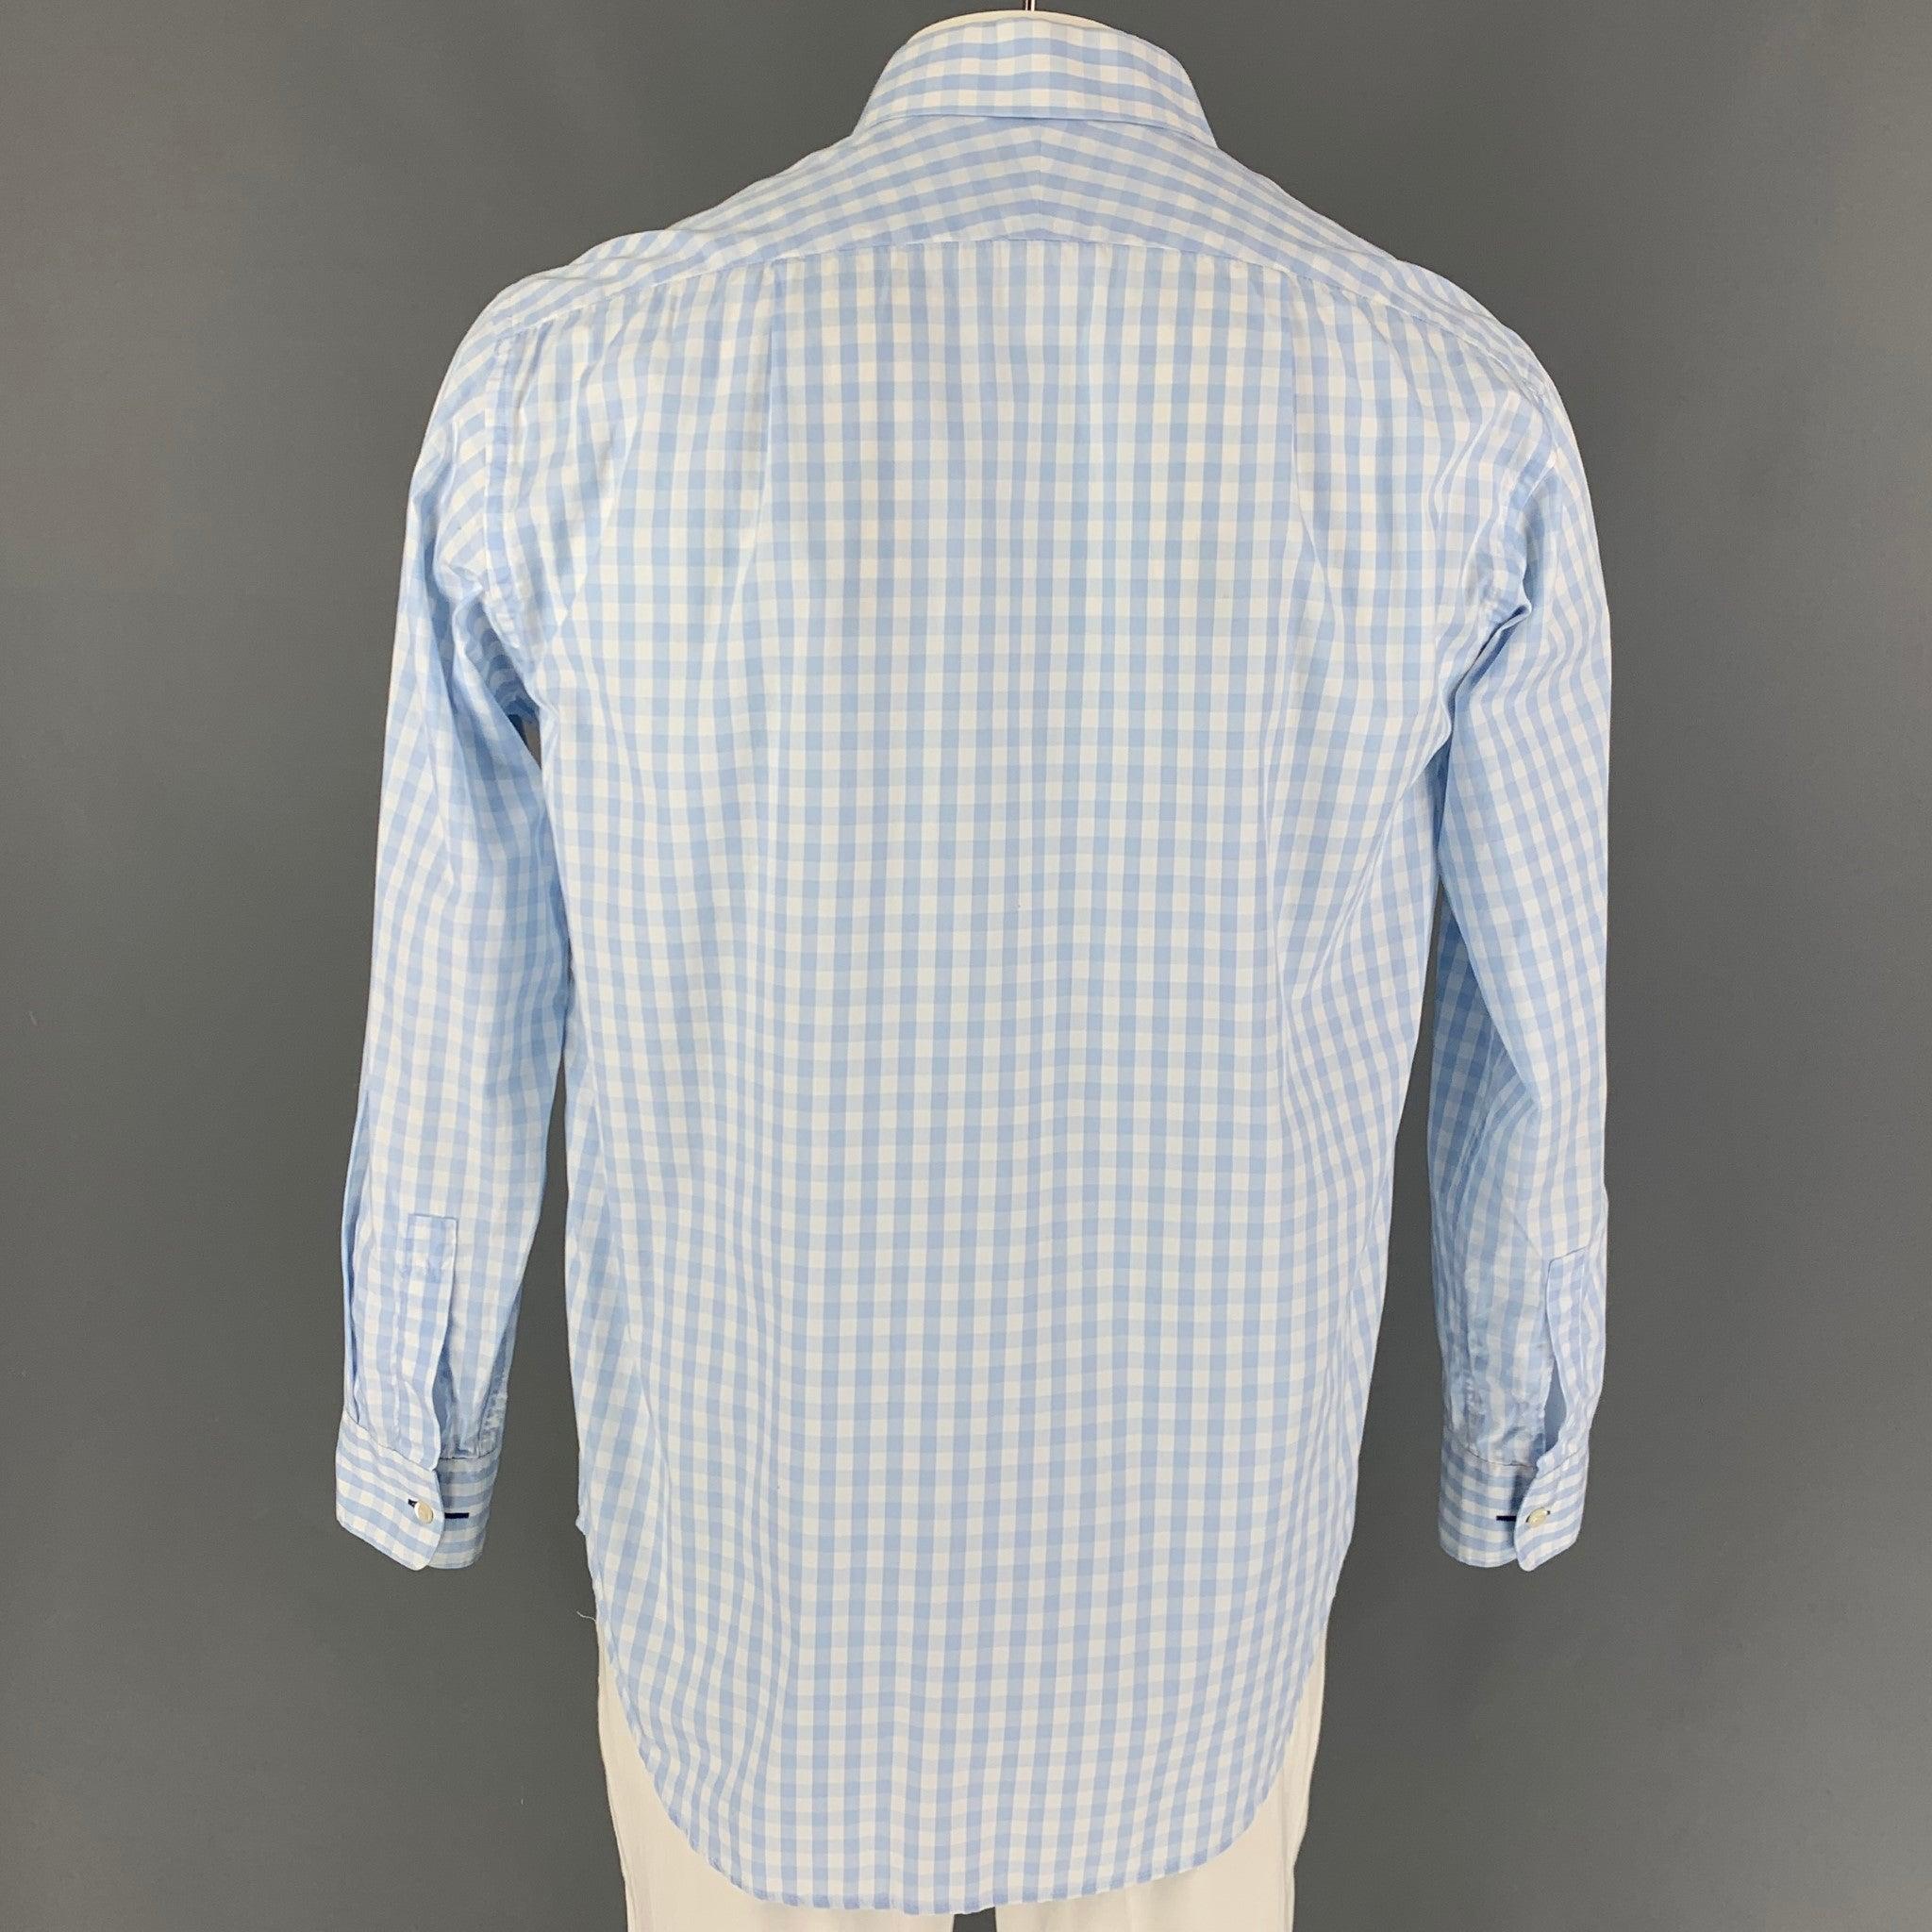 PAUL SMITH Size L Light Blue White Gingham Cotton Long Sleeve Shirt In Good Condition For Sale In San Francisco, CA